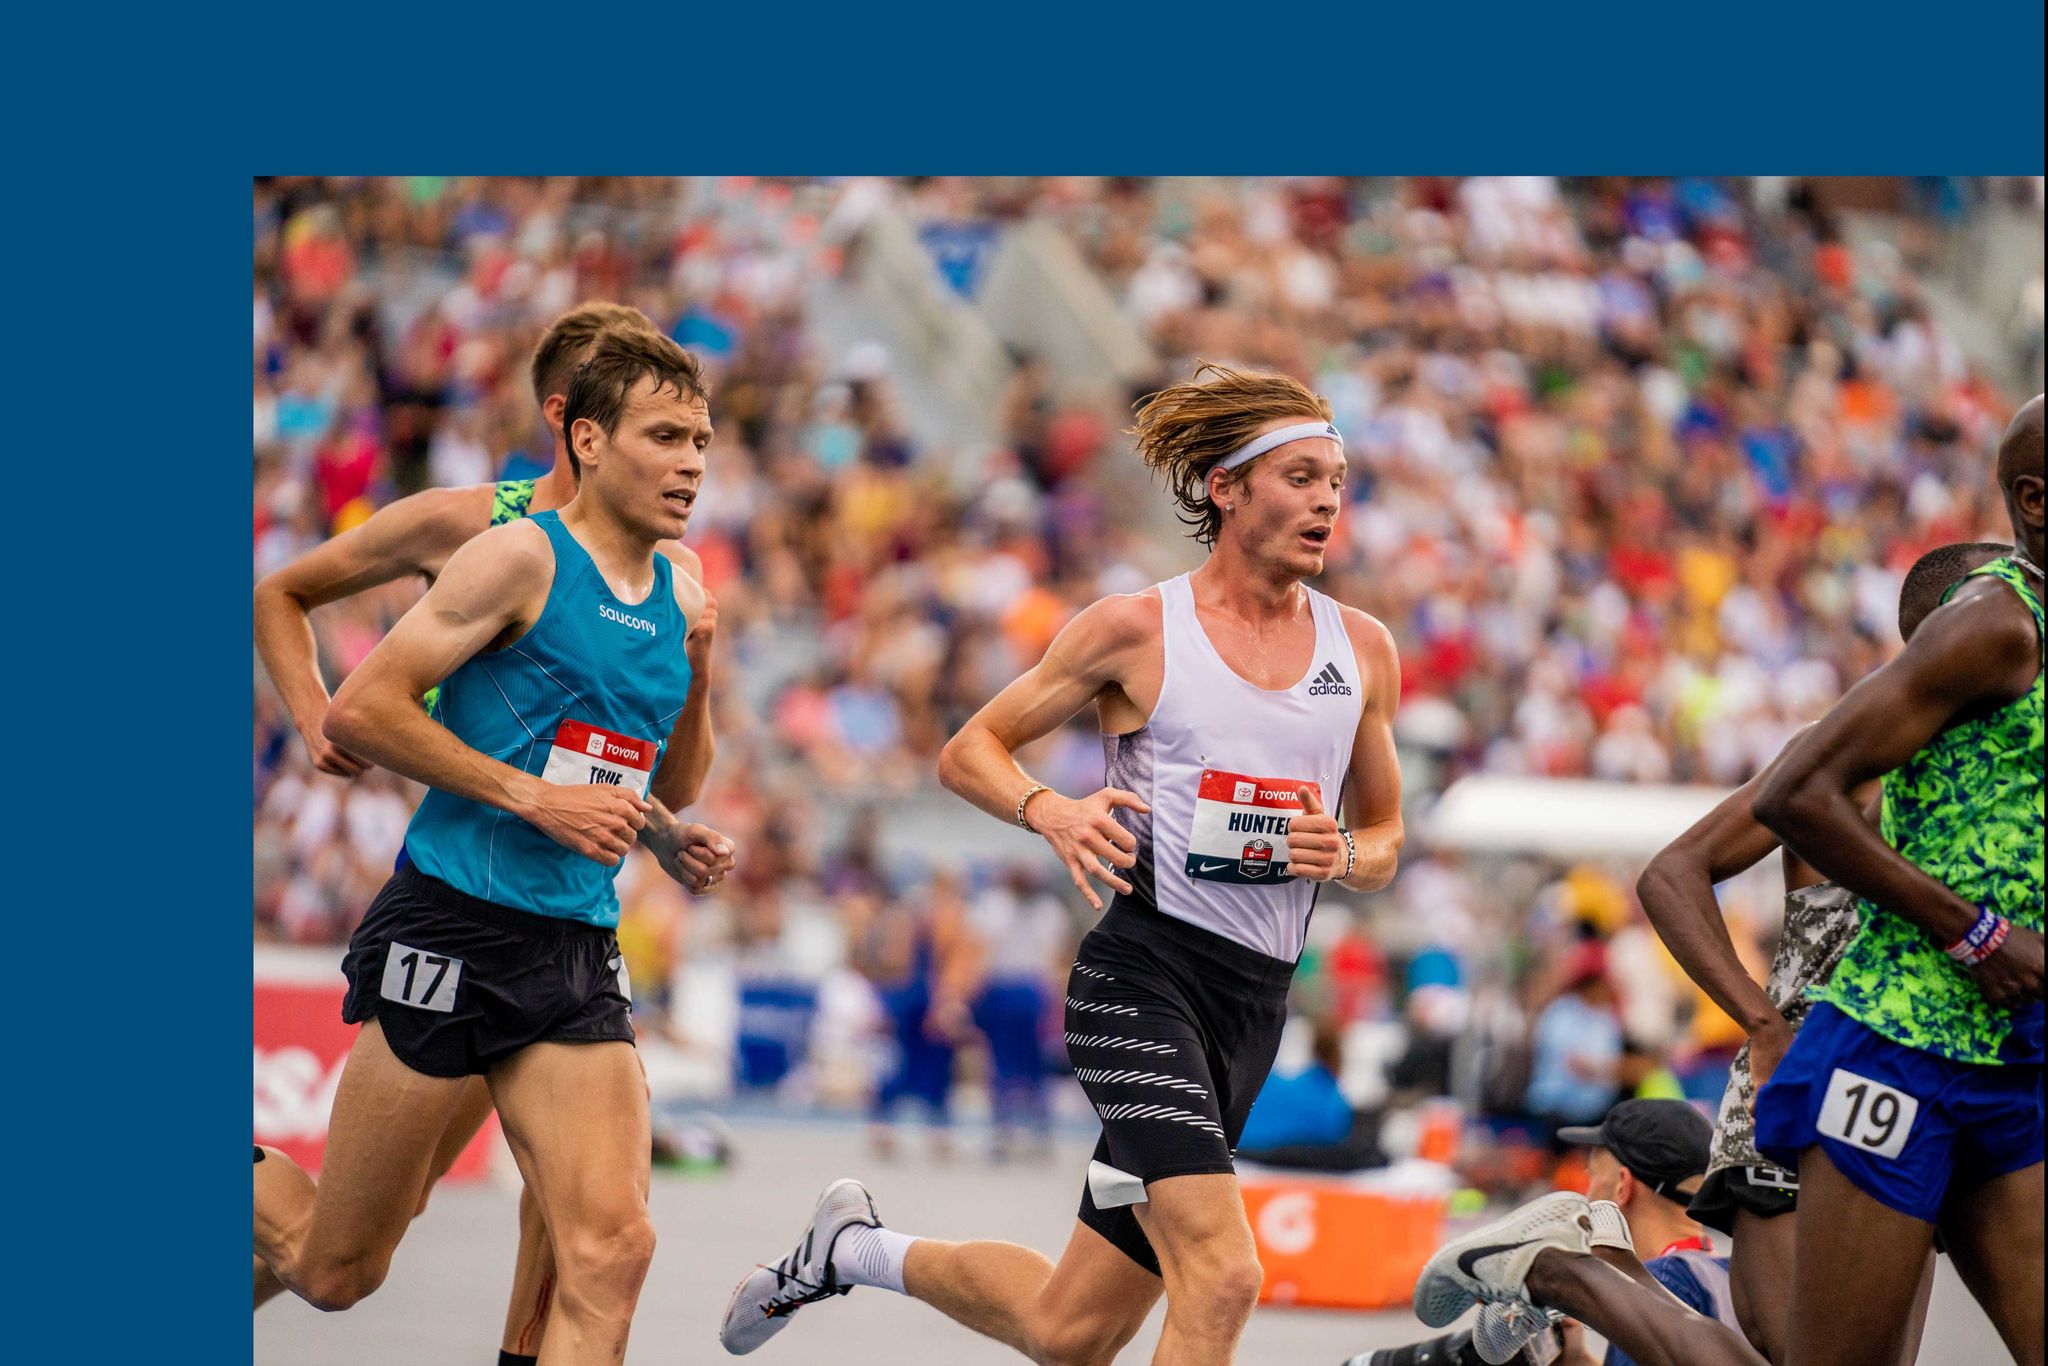 Drew Hunter competing in the 5K at the 2019 USATF Championships.